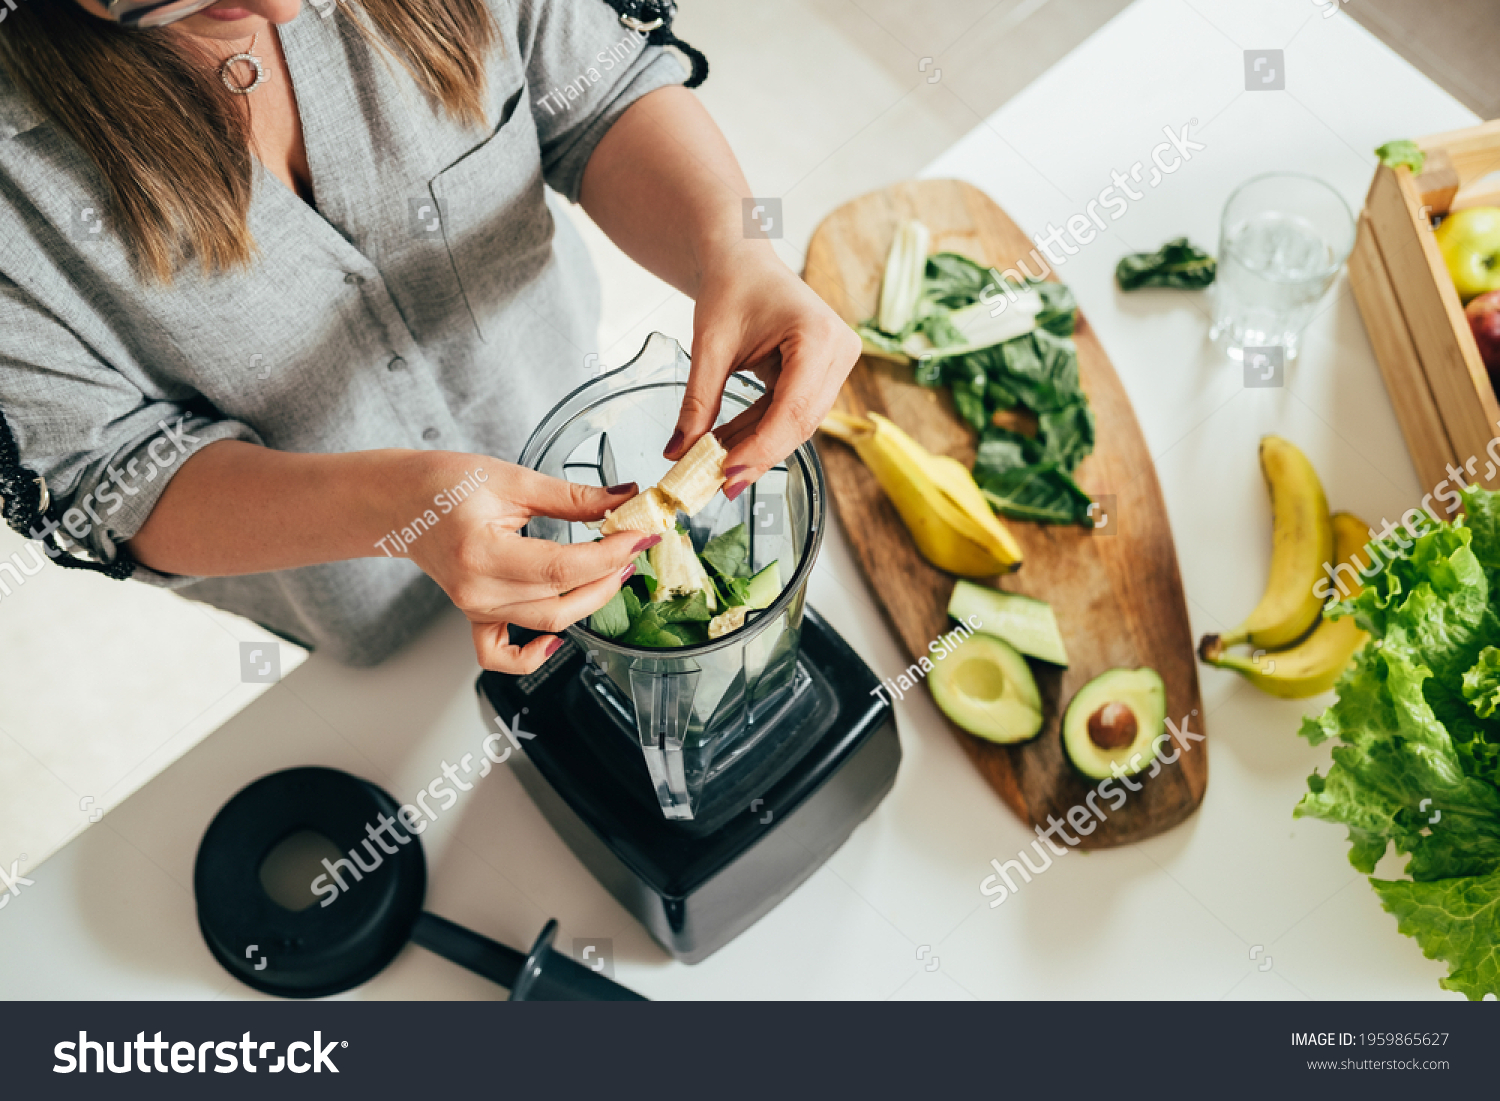 Woman is preparing a healthy detox drink in a blender - a  green smoothie with fresh fruits, green spinach and avocado. Healthy eating concept, ingredients for smoothies on the table, top view #1959865627